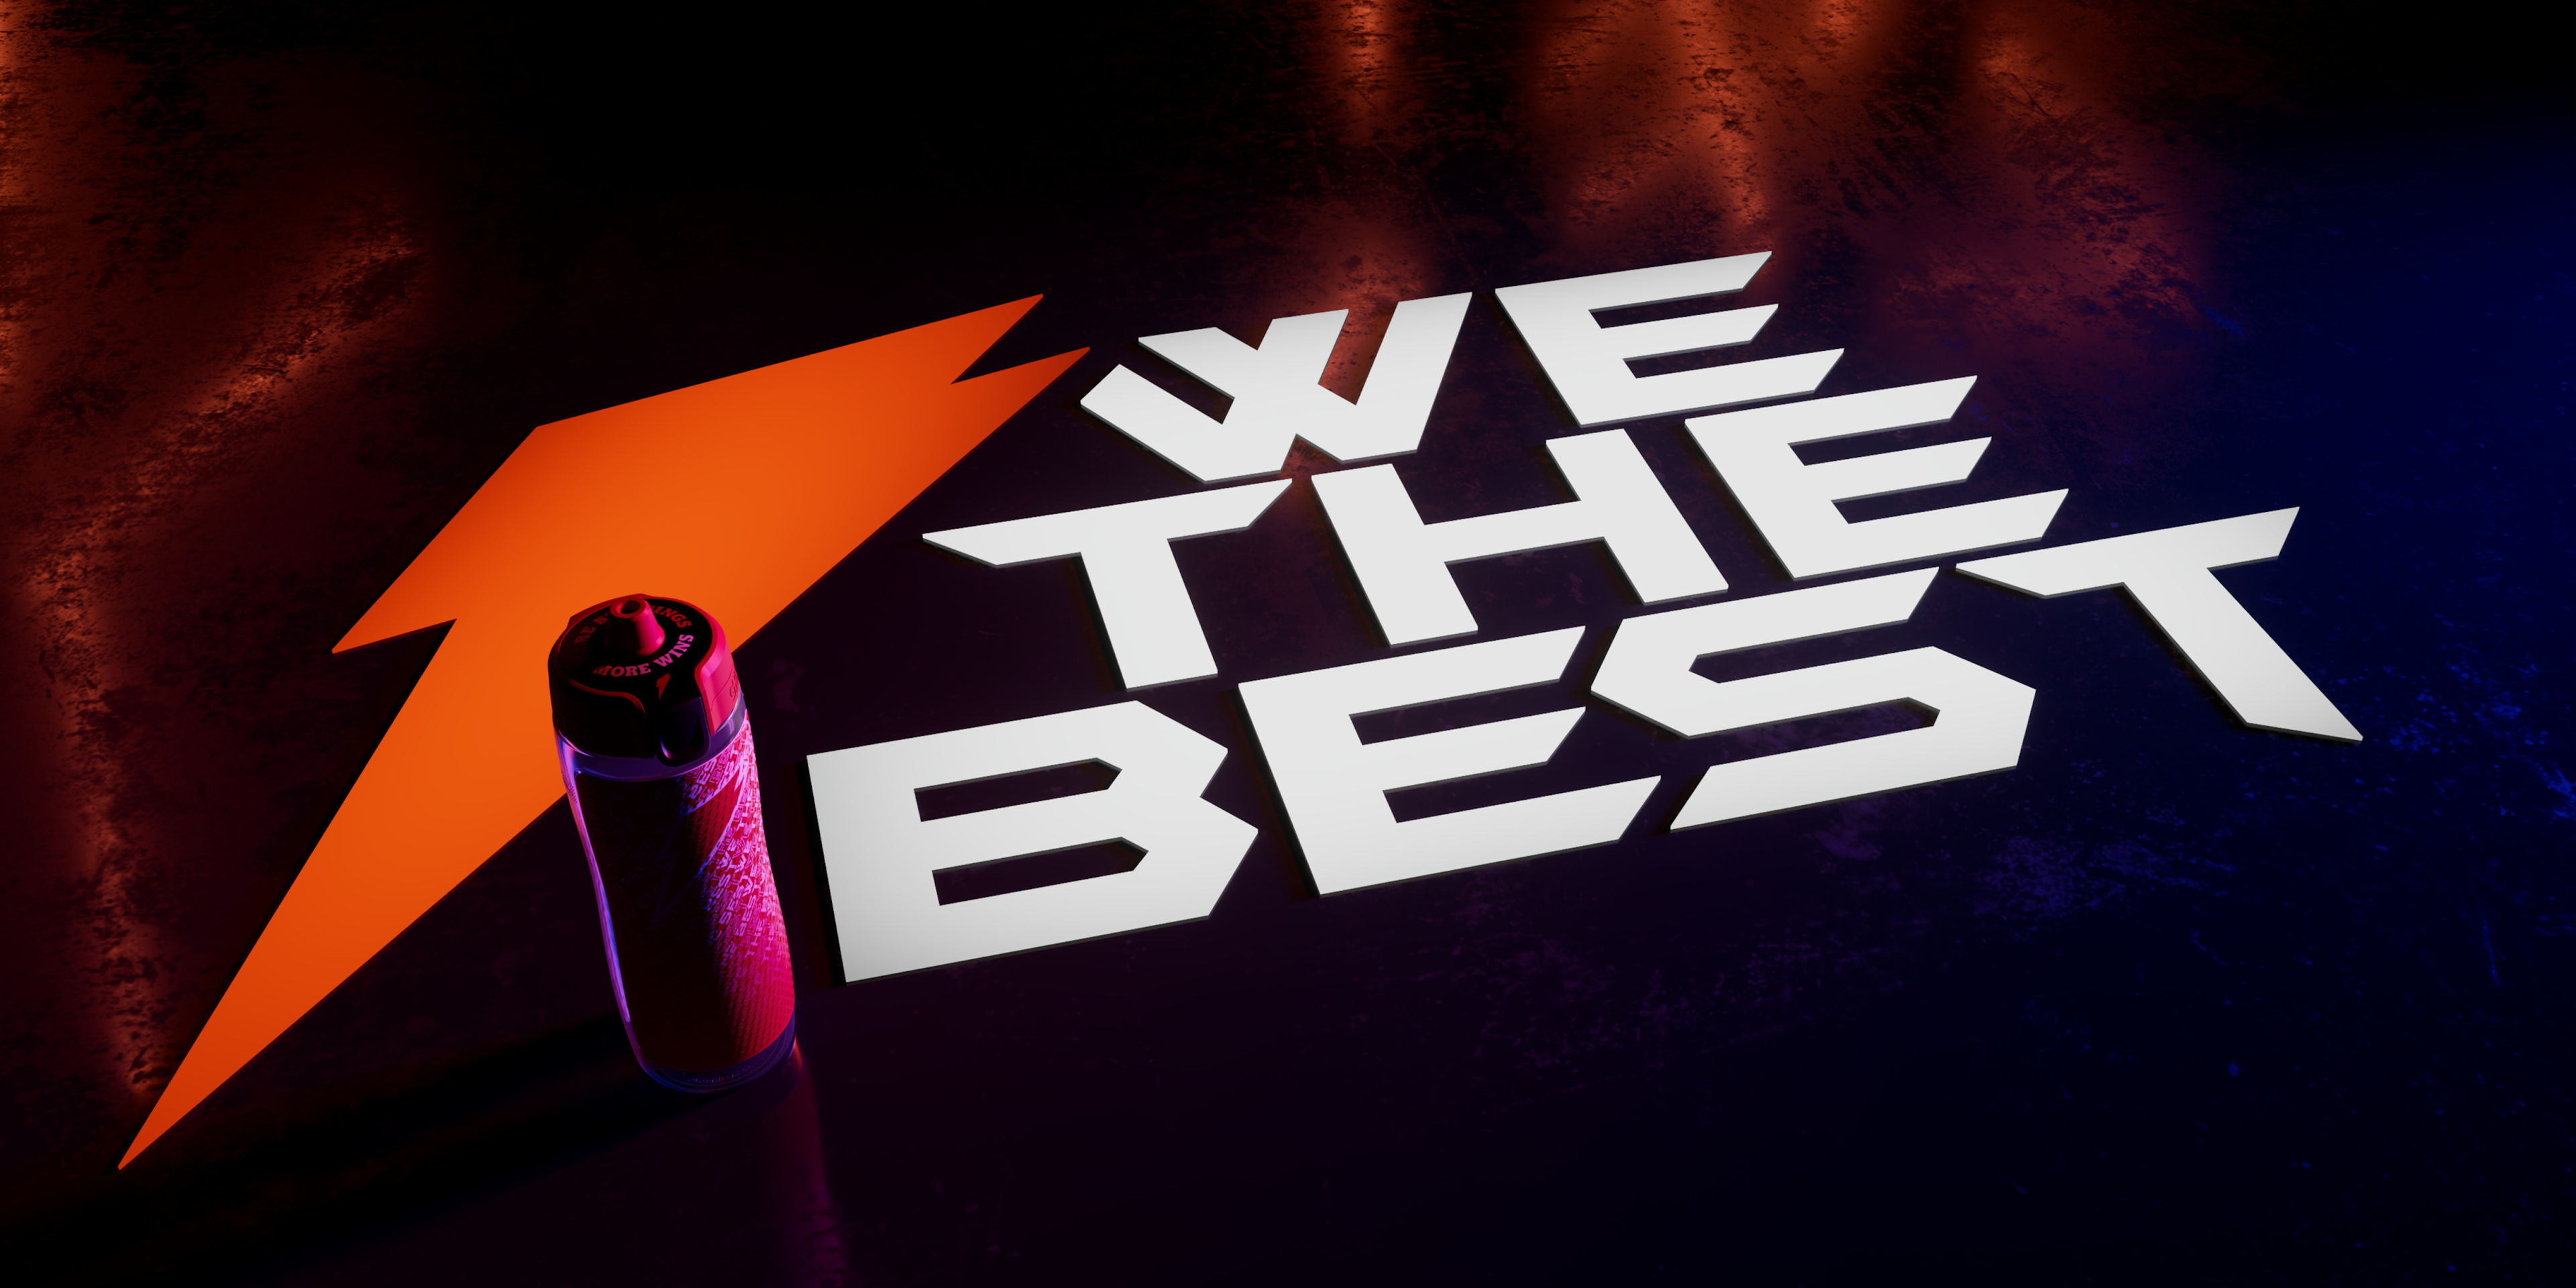 'We the best' logo and bottle